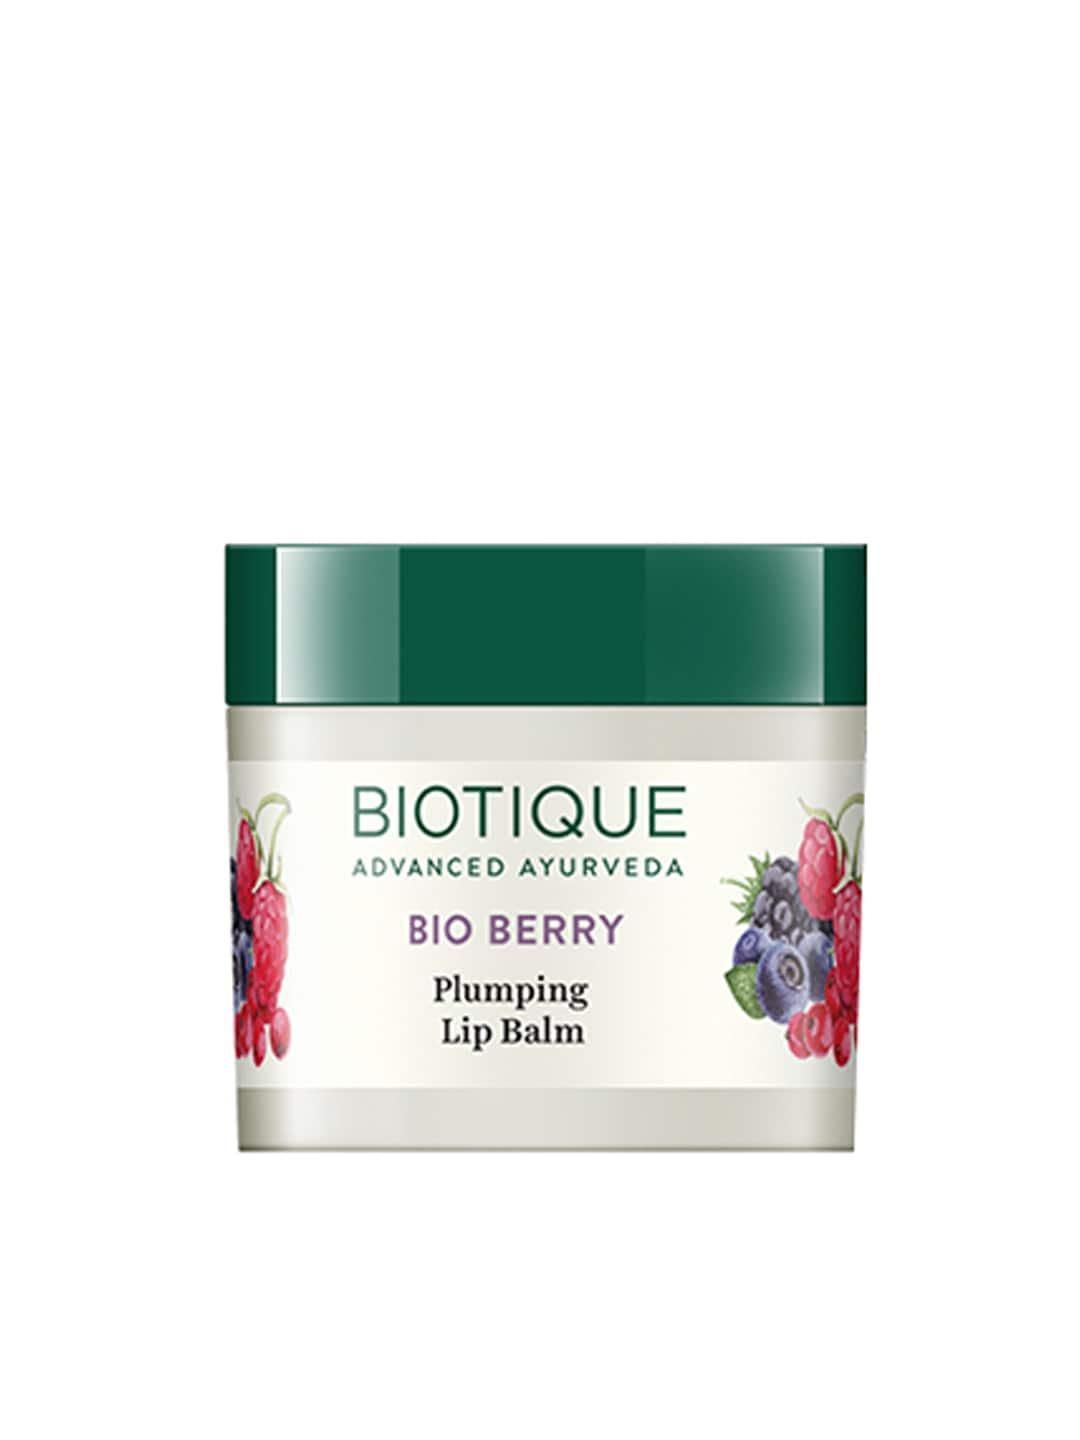 Biotique Bio Berry Plumping Smoothes & Swells Lip Balm 12g